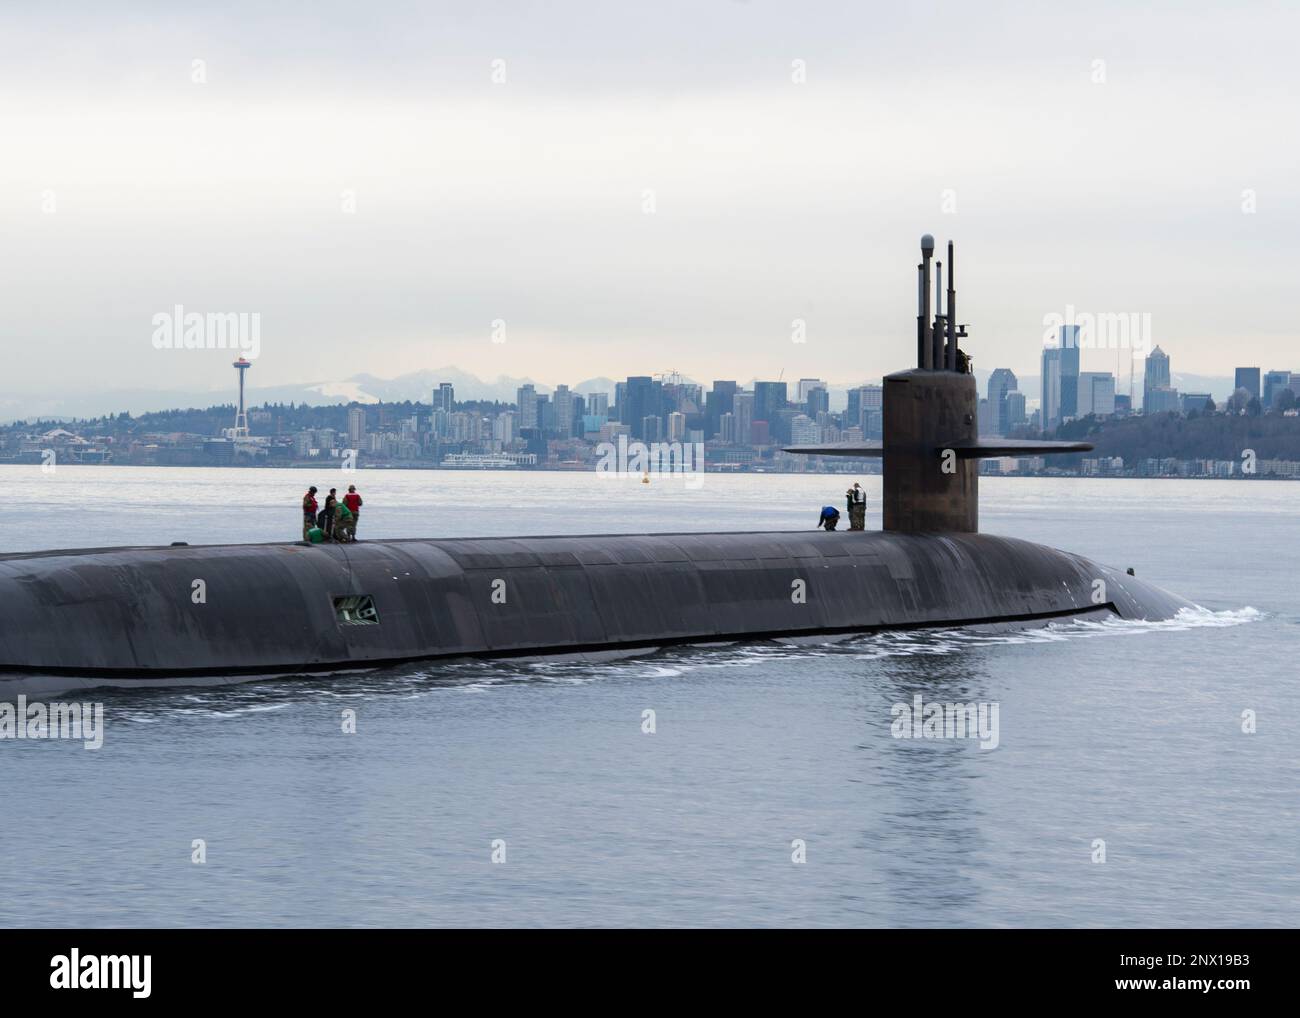 230209-N-ED185-1327  PUGET SOUND, Wash. (Feb. 9, 2023) The Ohio-class ballistic missile submarine USS Louisiana (SSBN 743) transits Puget Sound past the Seattle skyline following a 41-month engineered refueling overhaul at Puget Sound Naval Shipyard and Intermediate Maintenance Facility, February 9, 2023. Louisiana is one of eight ballistic-missile submarines stationed at Naval Base Kitsap-Bangor, providing the most survivable leg of the strategic deterrence triad for the United States. Stock Photo